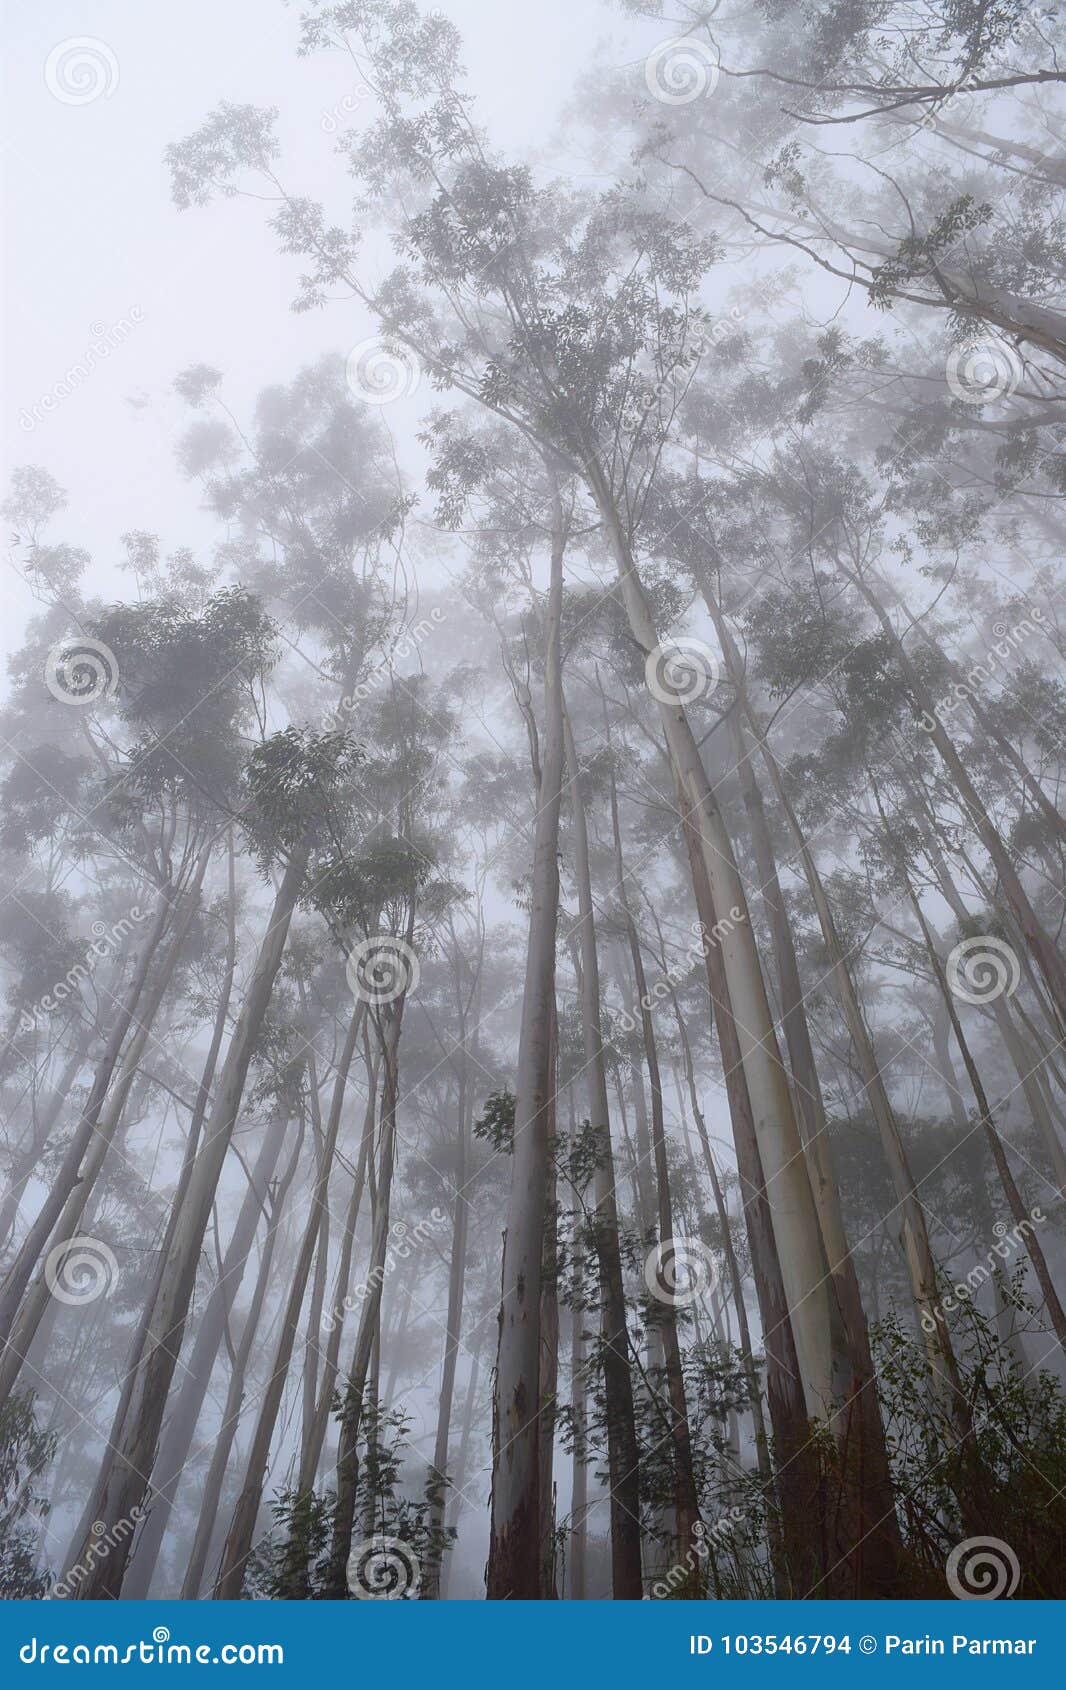 Misty Forest with Tall Trees and Infinite Sky - Mobile Screen Wallpaper  Stock Photo - Image of condensation, kerala: 103546794